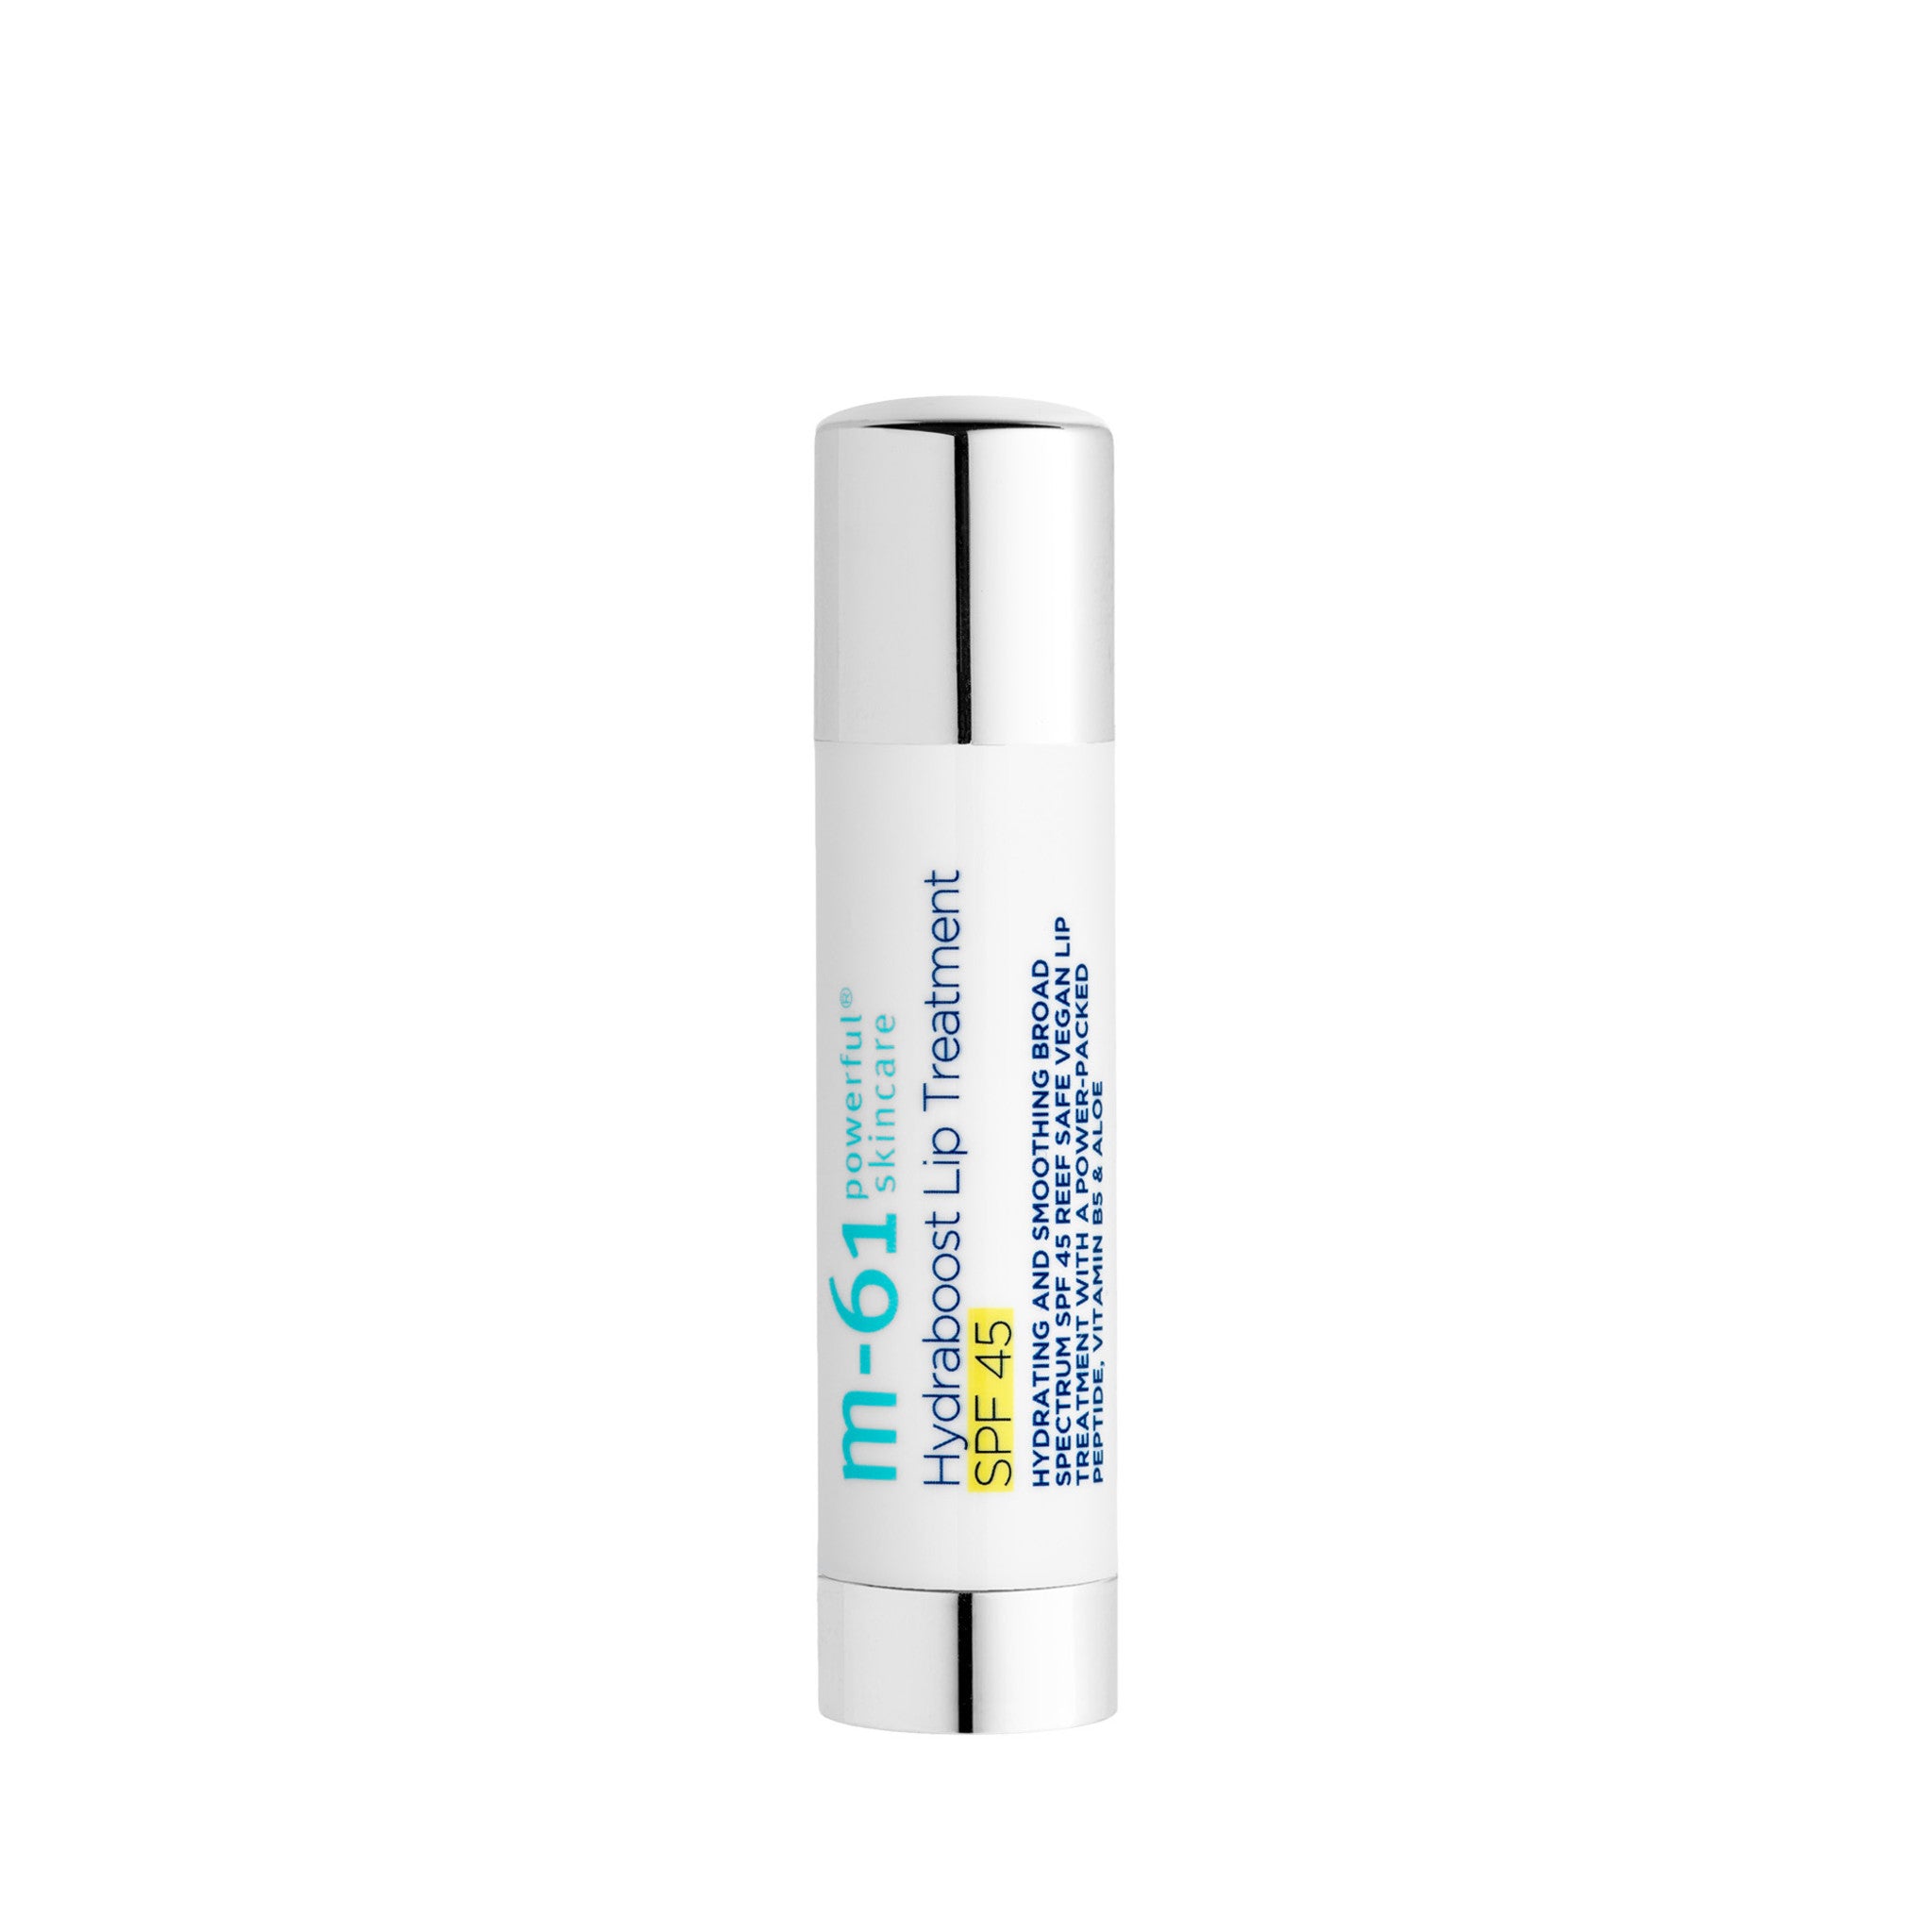 M-61 Hydraboost Lip Treatment SPF 45 main image. This product is in the color clear